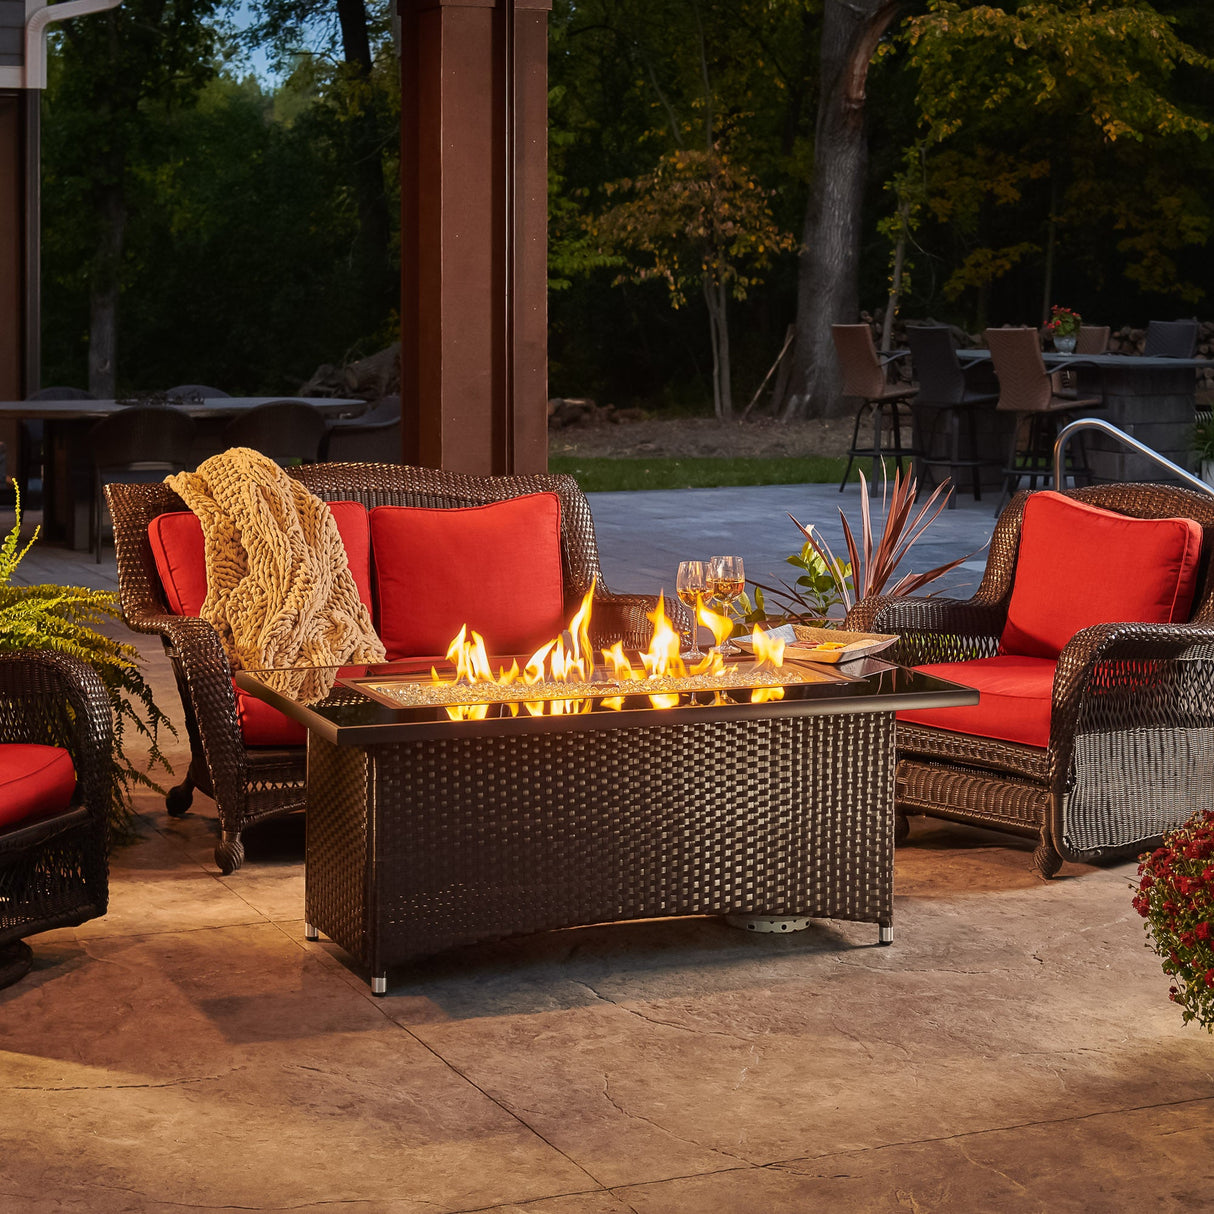 The Montego Linear Gas Fire Pit Table in a scenic patio set up with flowers and patio furniture